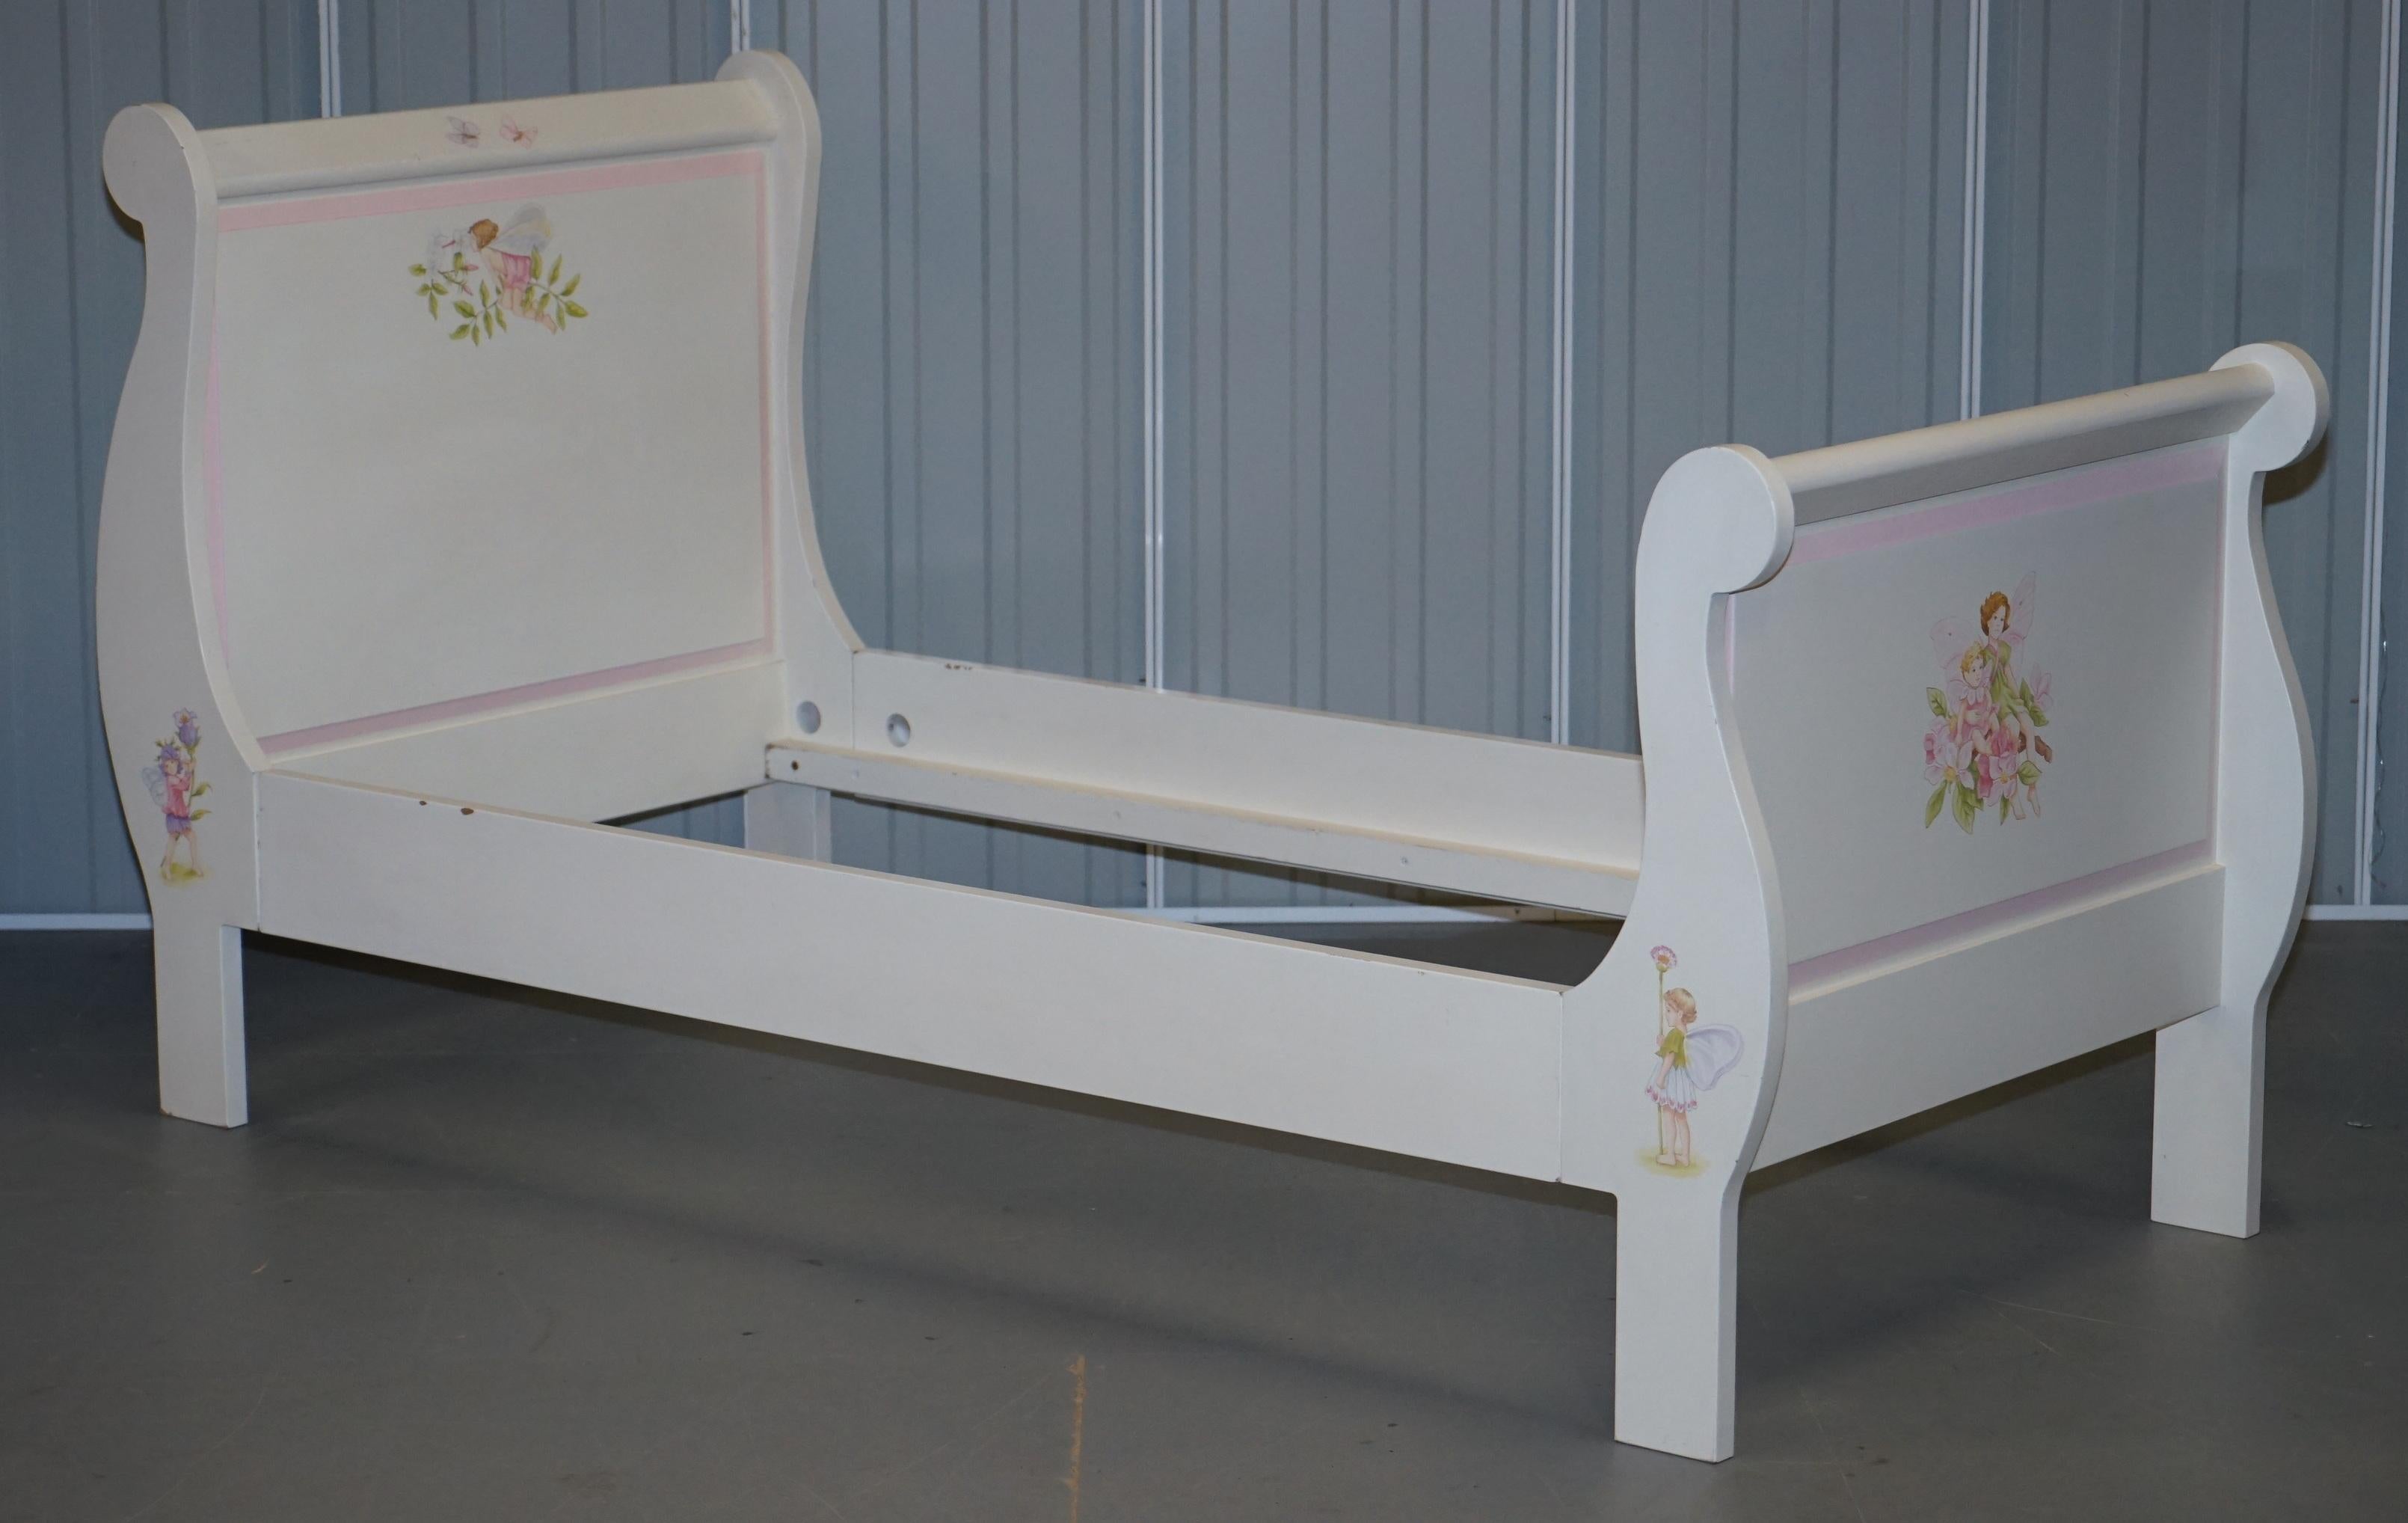 We are delighted to offer for sale this original RRP £2,395 Dragons of Walton Street Chelsea hand painted butterfly fairy girls bed frame

Official description

Our artists' favourite bed - and we know why. The curved ends of this wonderful